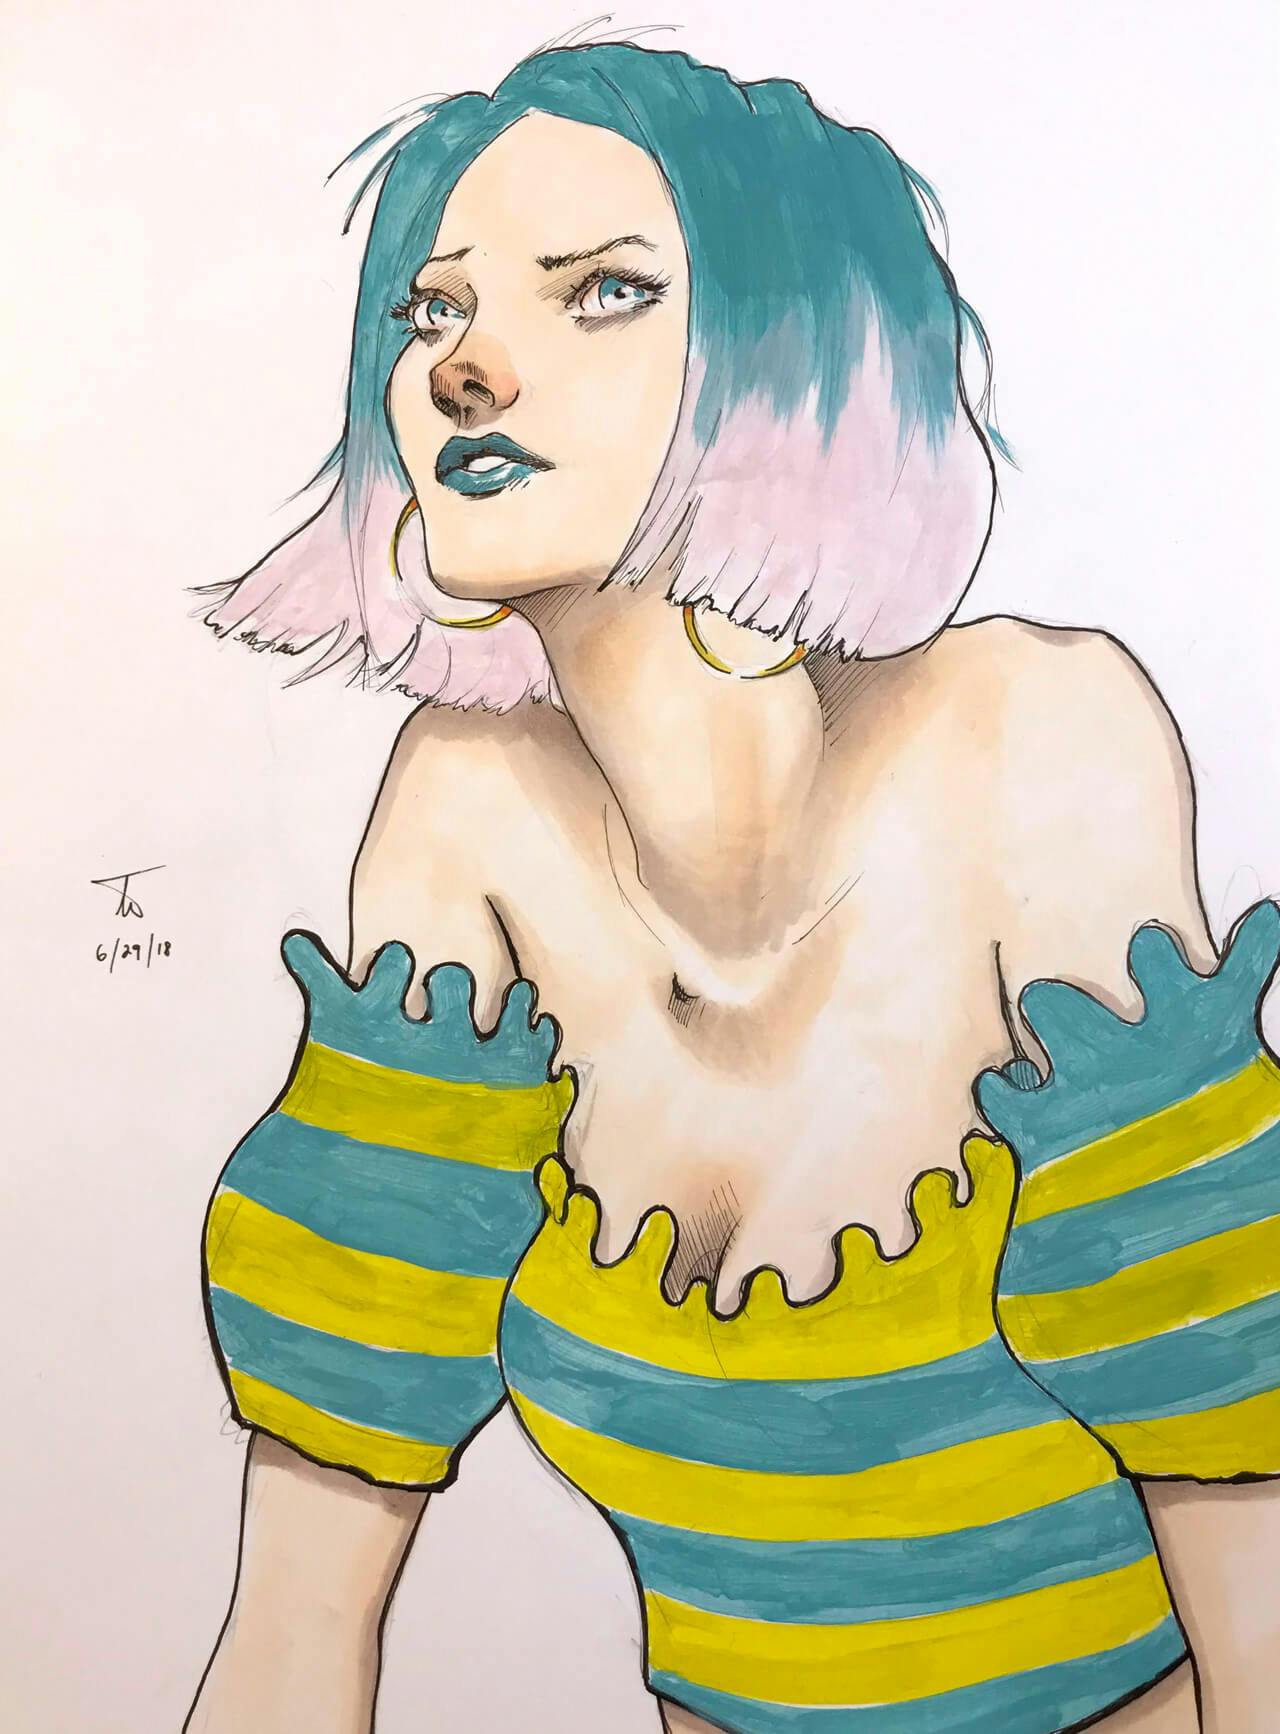 Ink & marker illustration of girl with hoop earrings, teal hair in a teal and chartreuse striped blouse, leaning forward